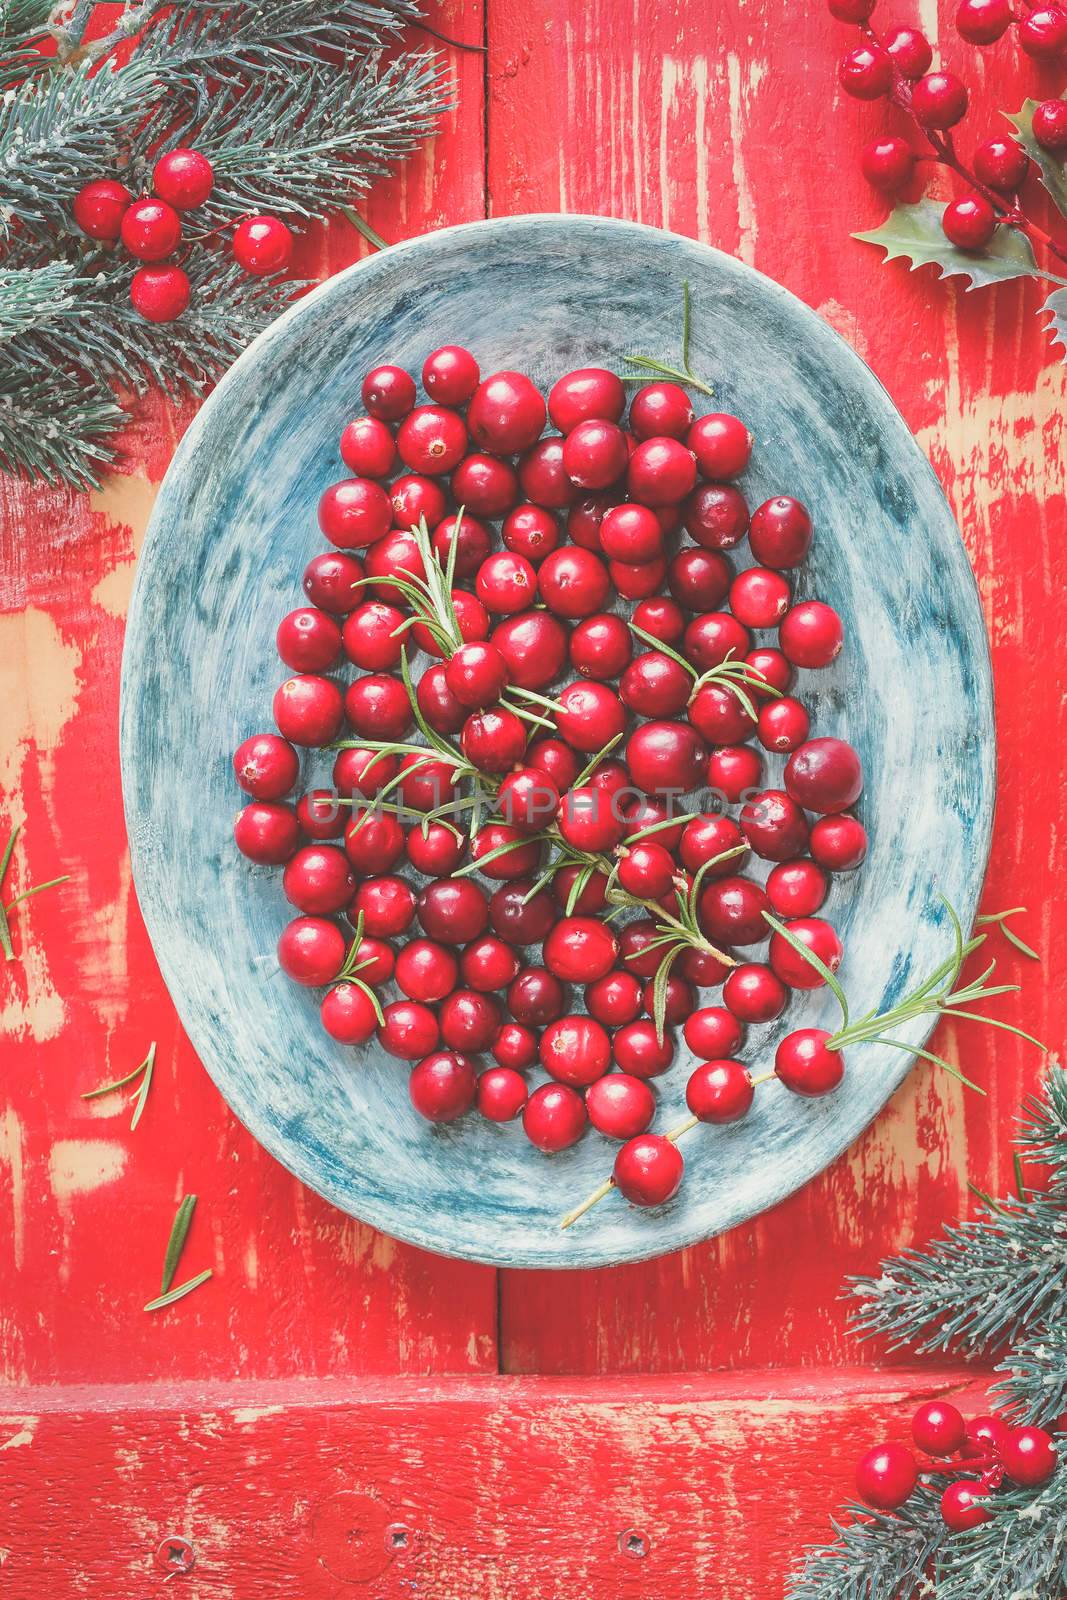 Fresh red Cranberries on a plate, painted wooden background. Top view, vintage toned